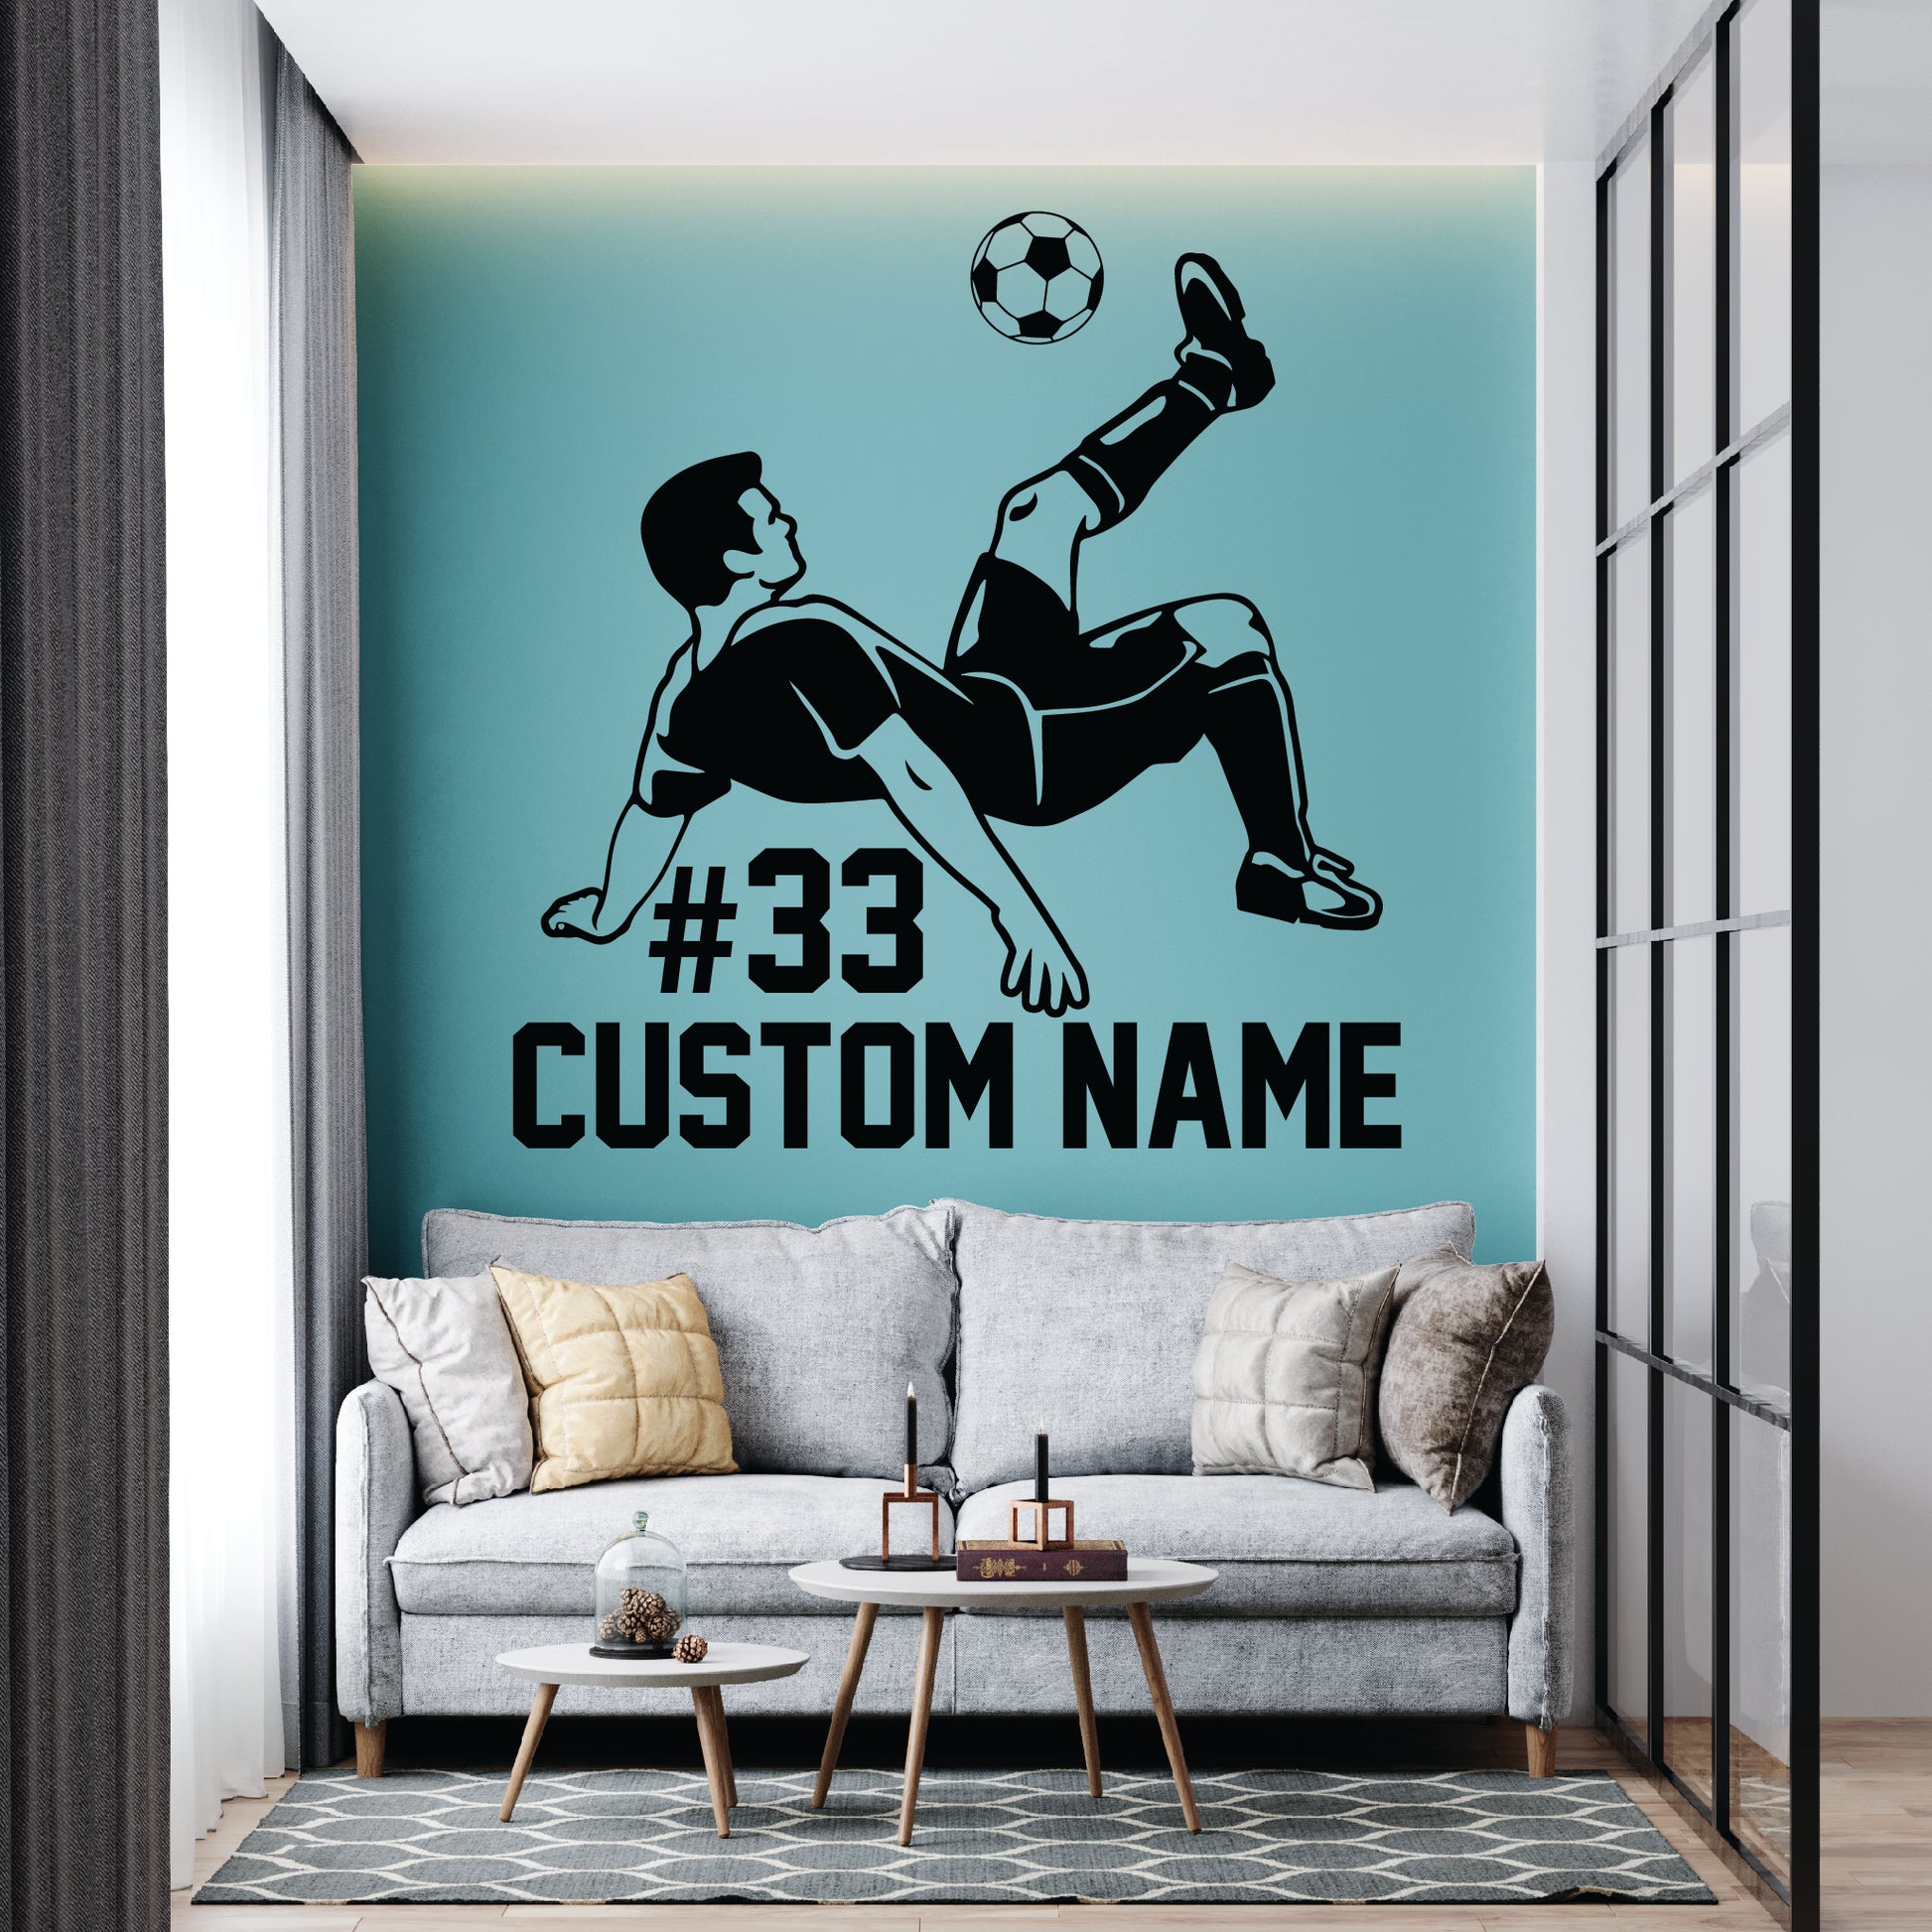 Soccer_player_wall_decal